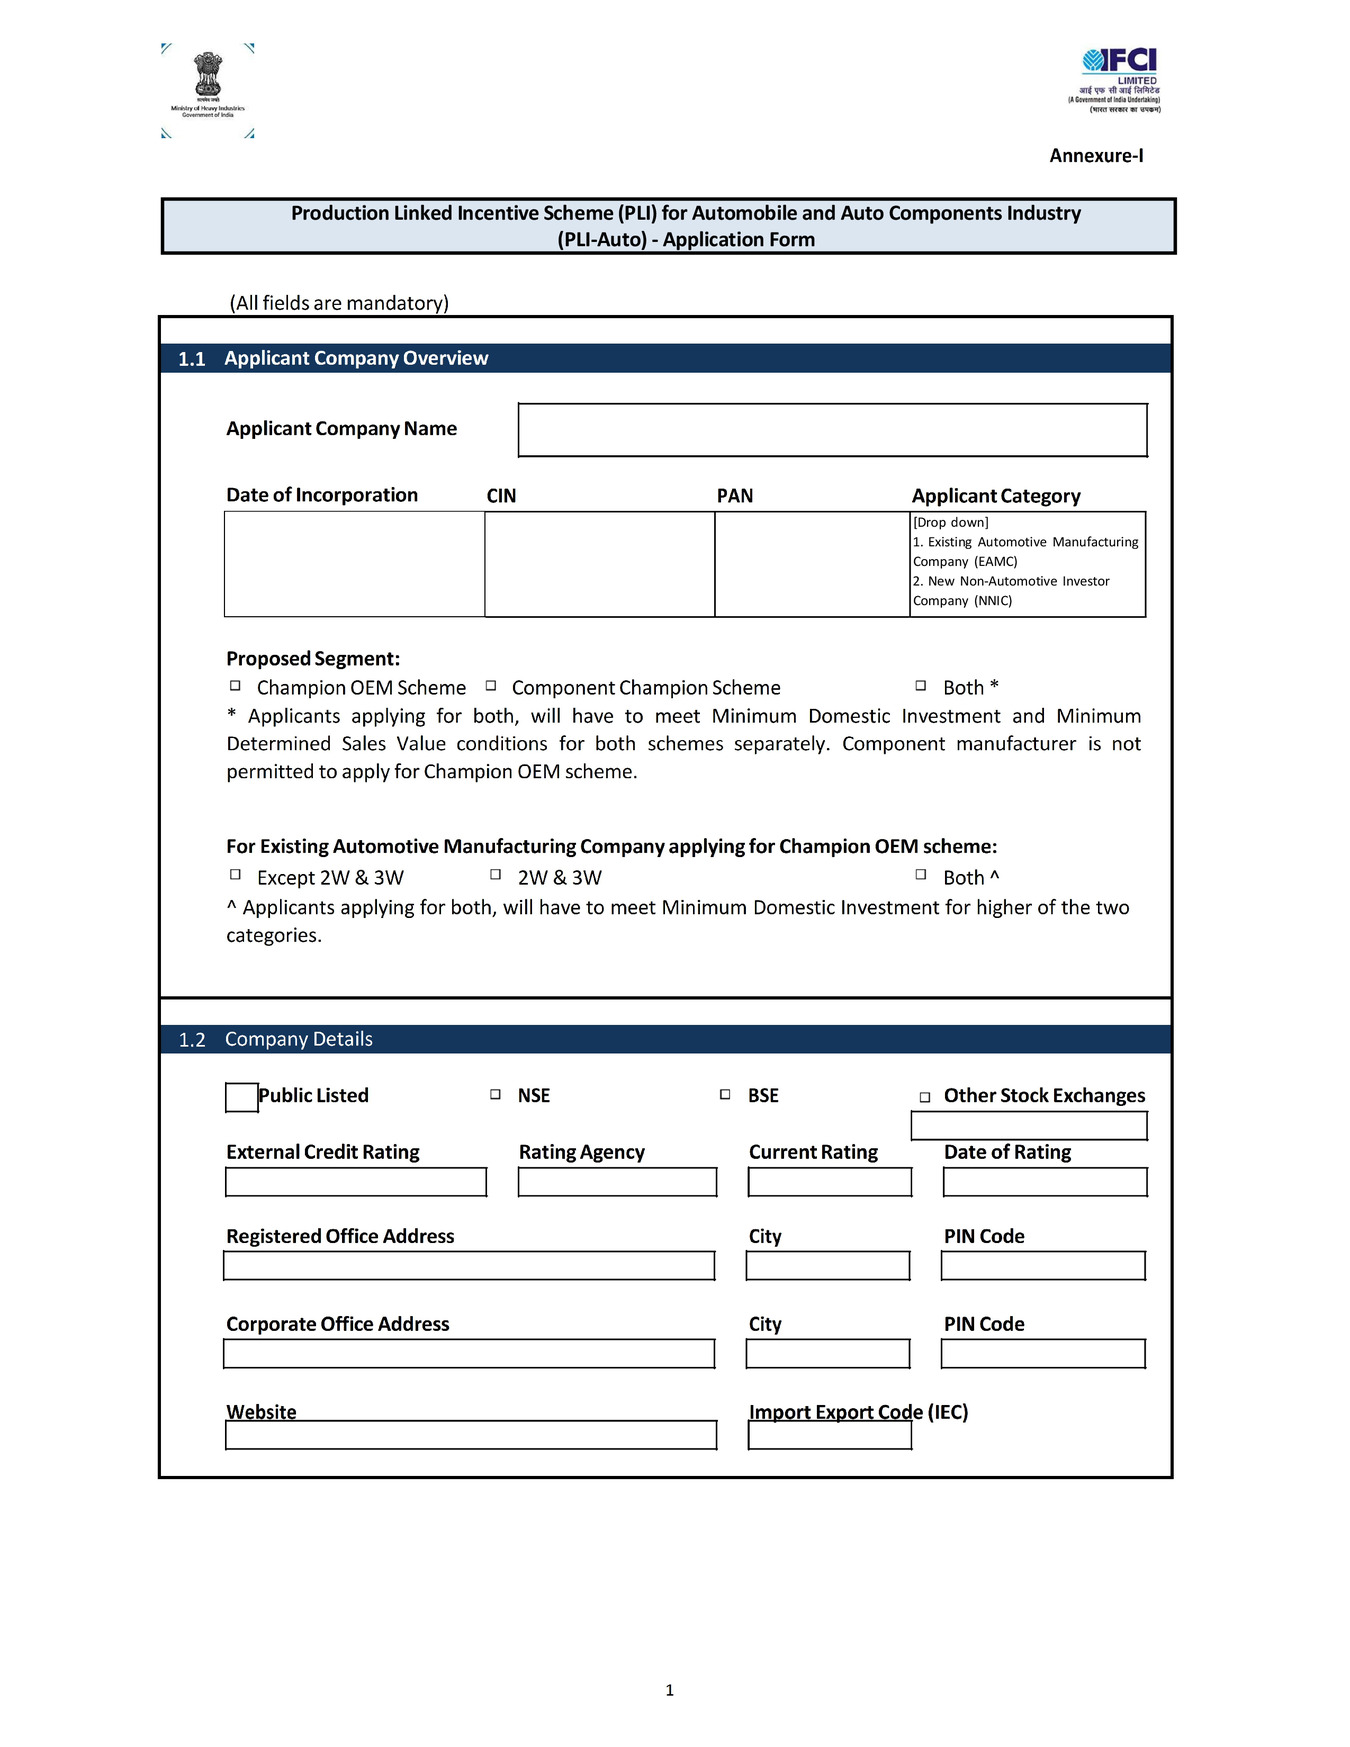 PLI Scheme for Automobile and Auto Component Industry Application Form 2023 PDF